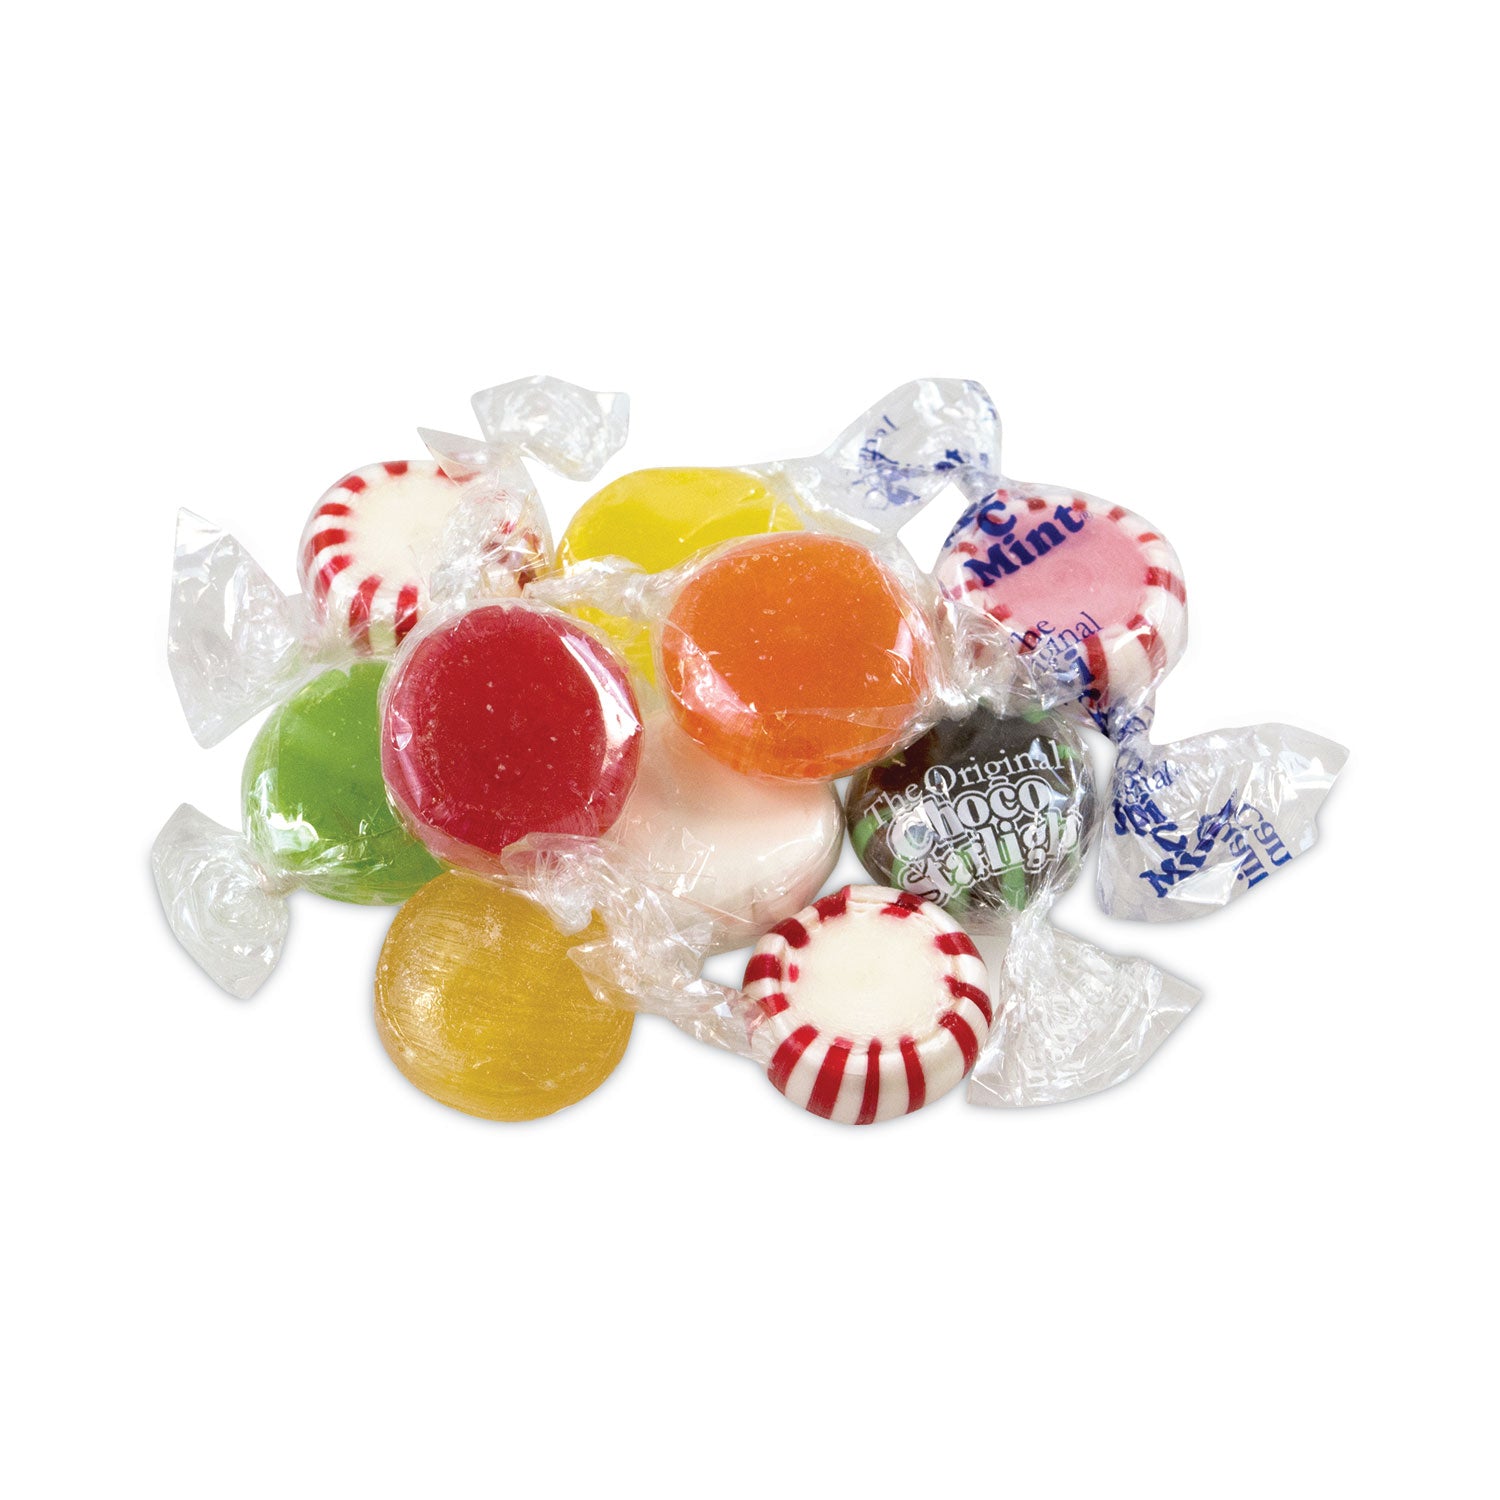 candy-jar-favorites-assorted-flavors-5-lb-90-pieces-jar-ships-in-1-3-business-days_grr21000052 - 1